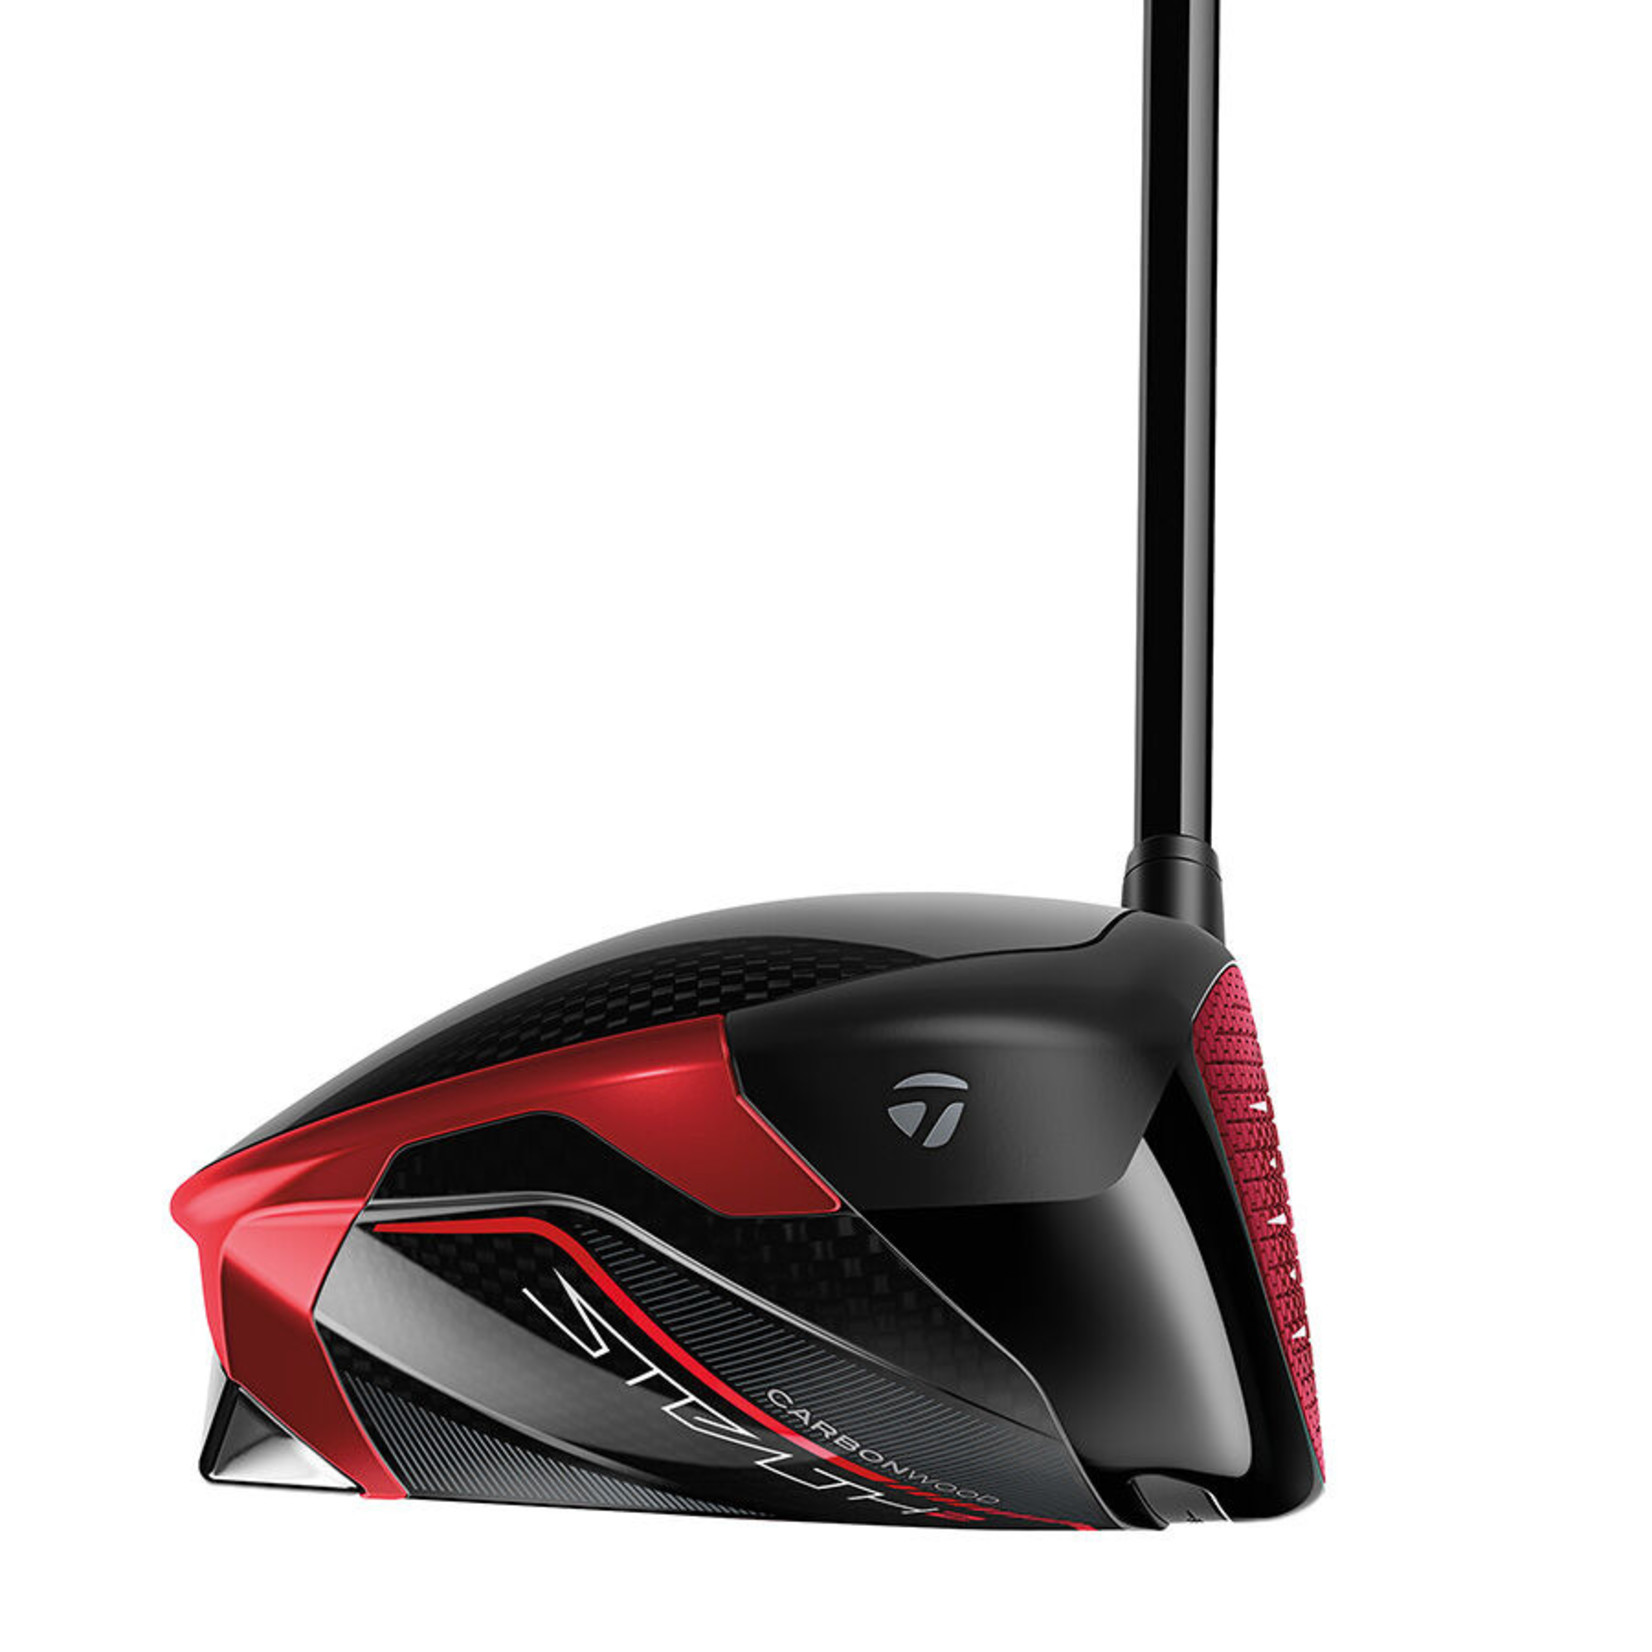 TAYLORMADE STEALTH 2 DRIVER - RIGHT HAND